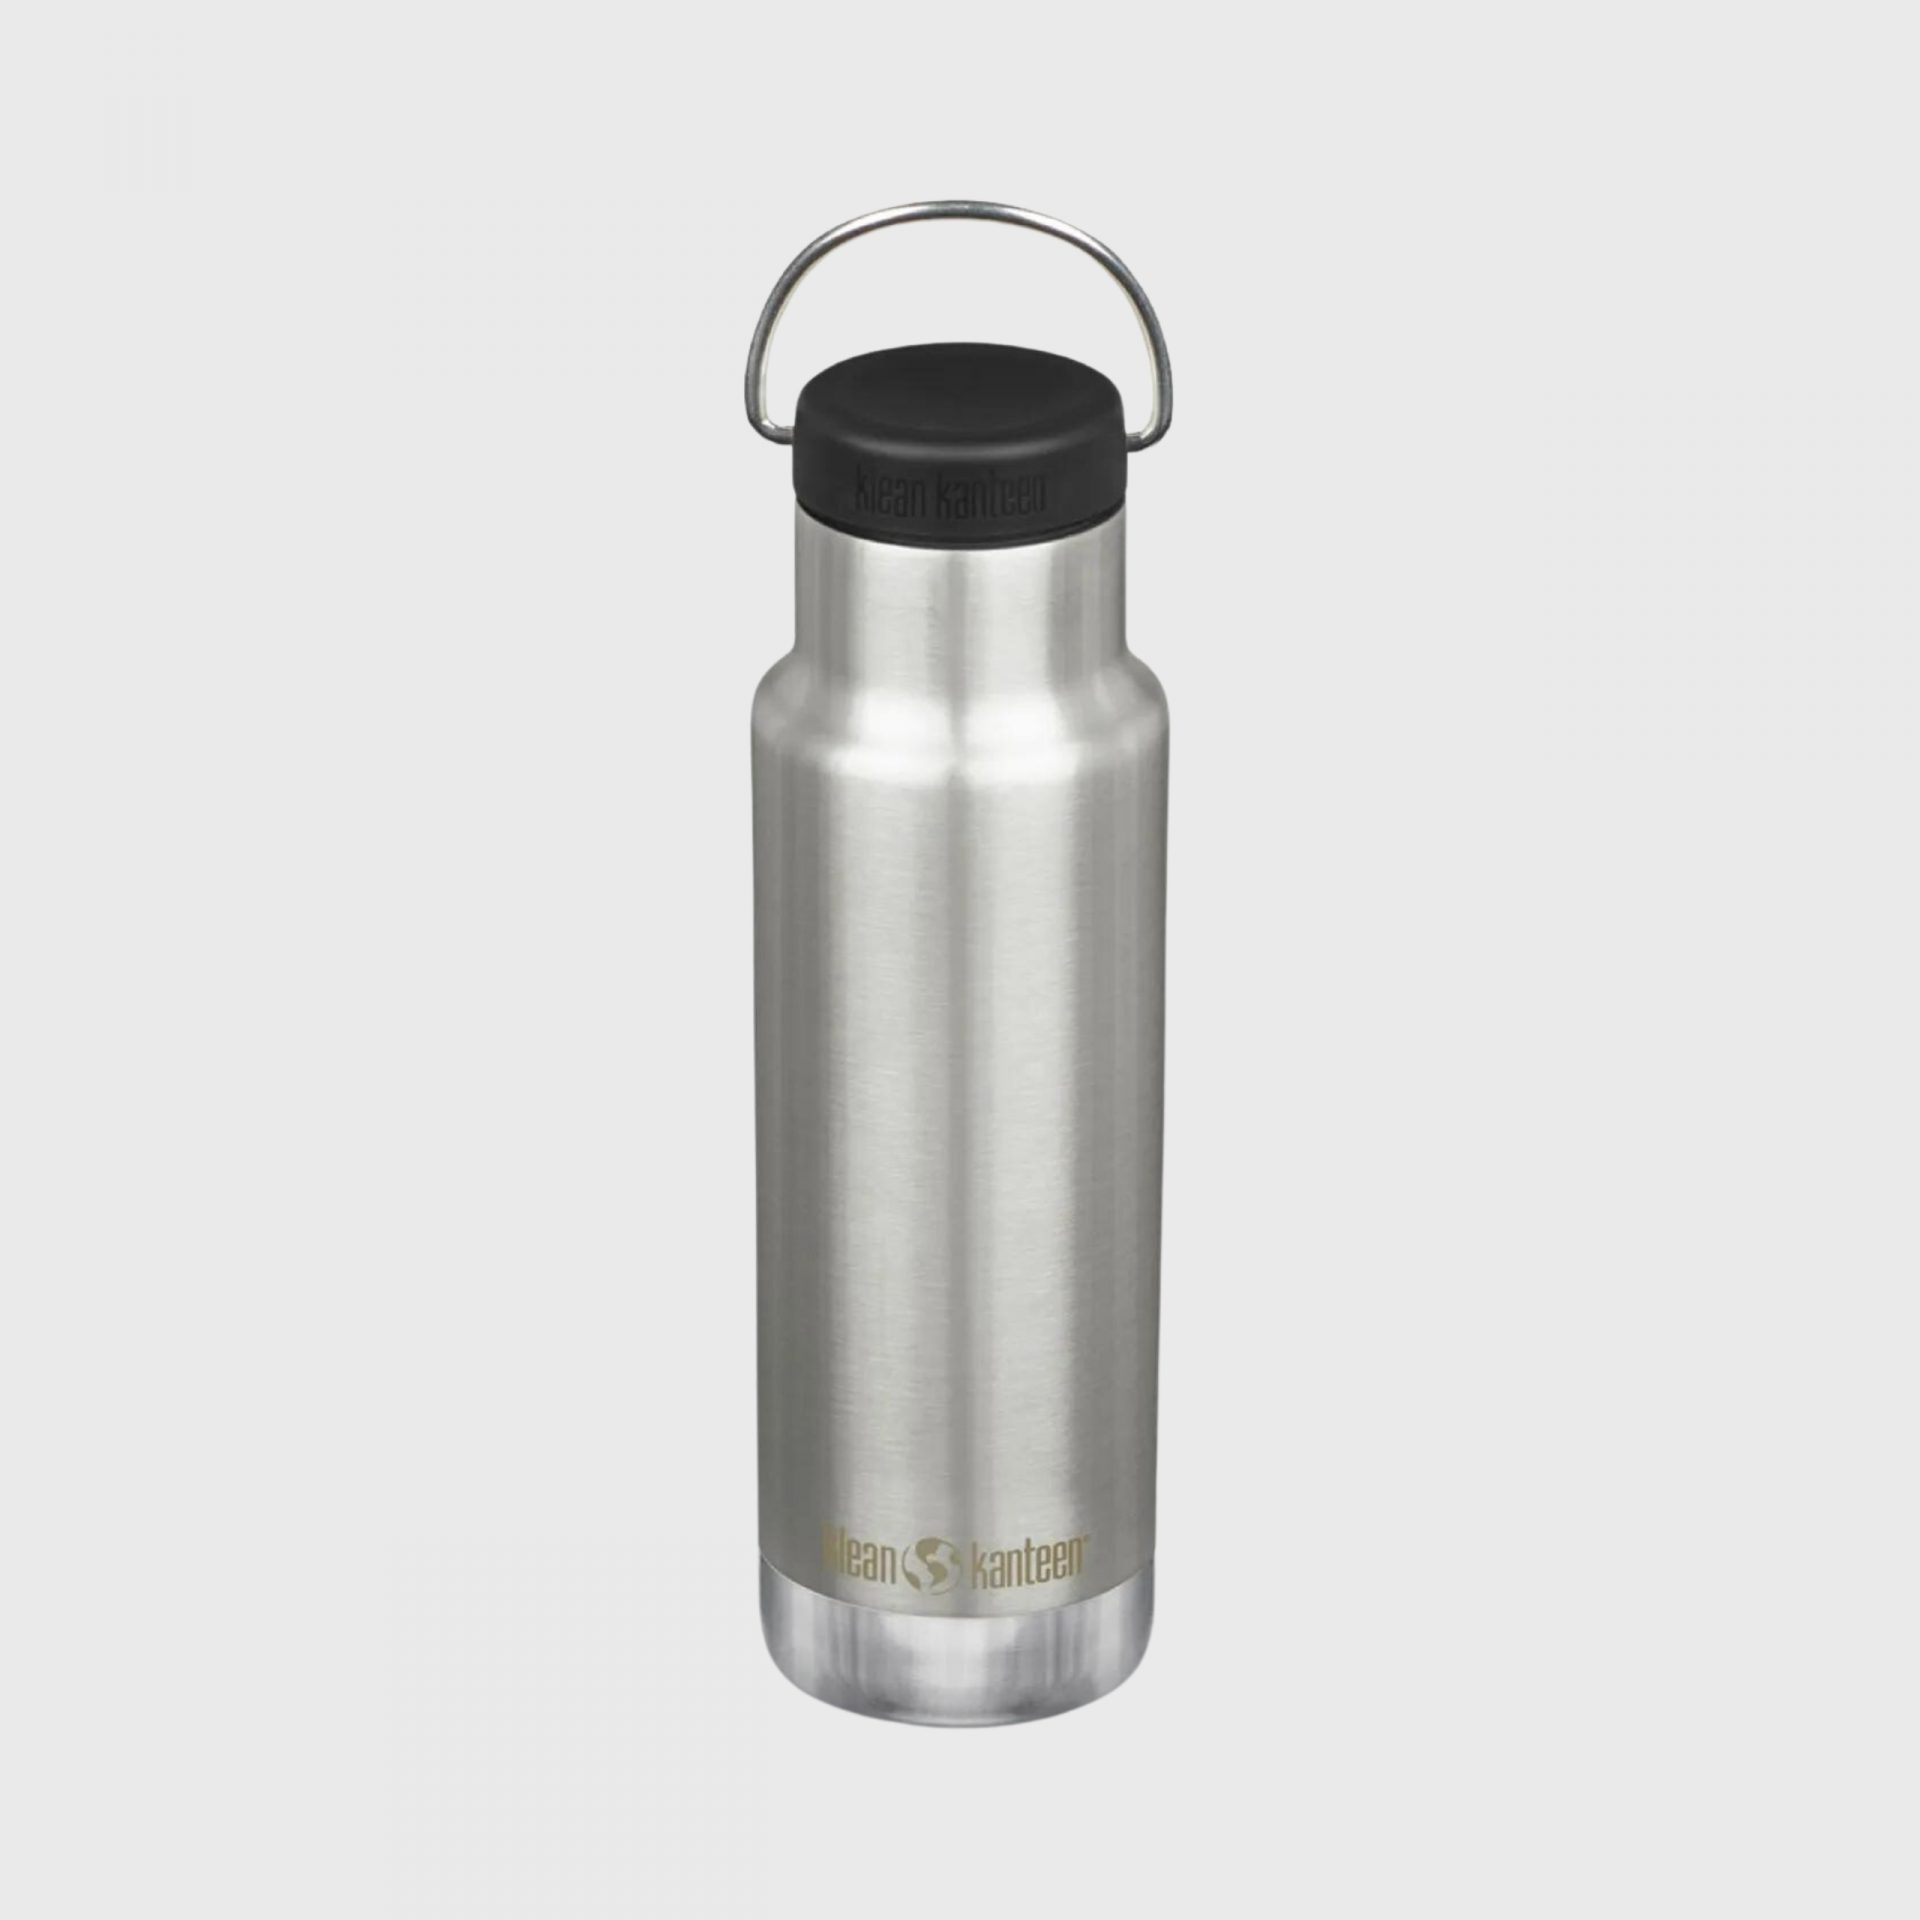 Kleen Kanteen Singapore Sustainable Insulated Classic 12oz Water Bottle with Loop Cap (Brushed Stainless)